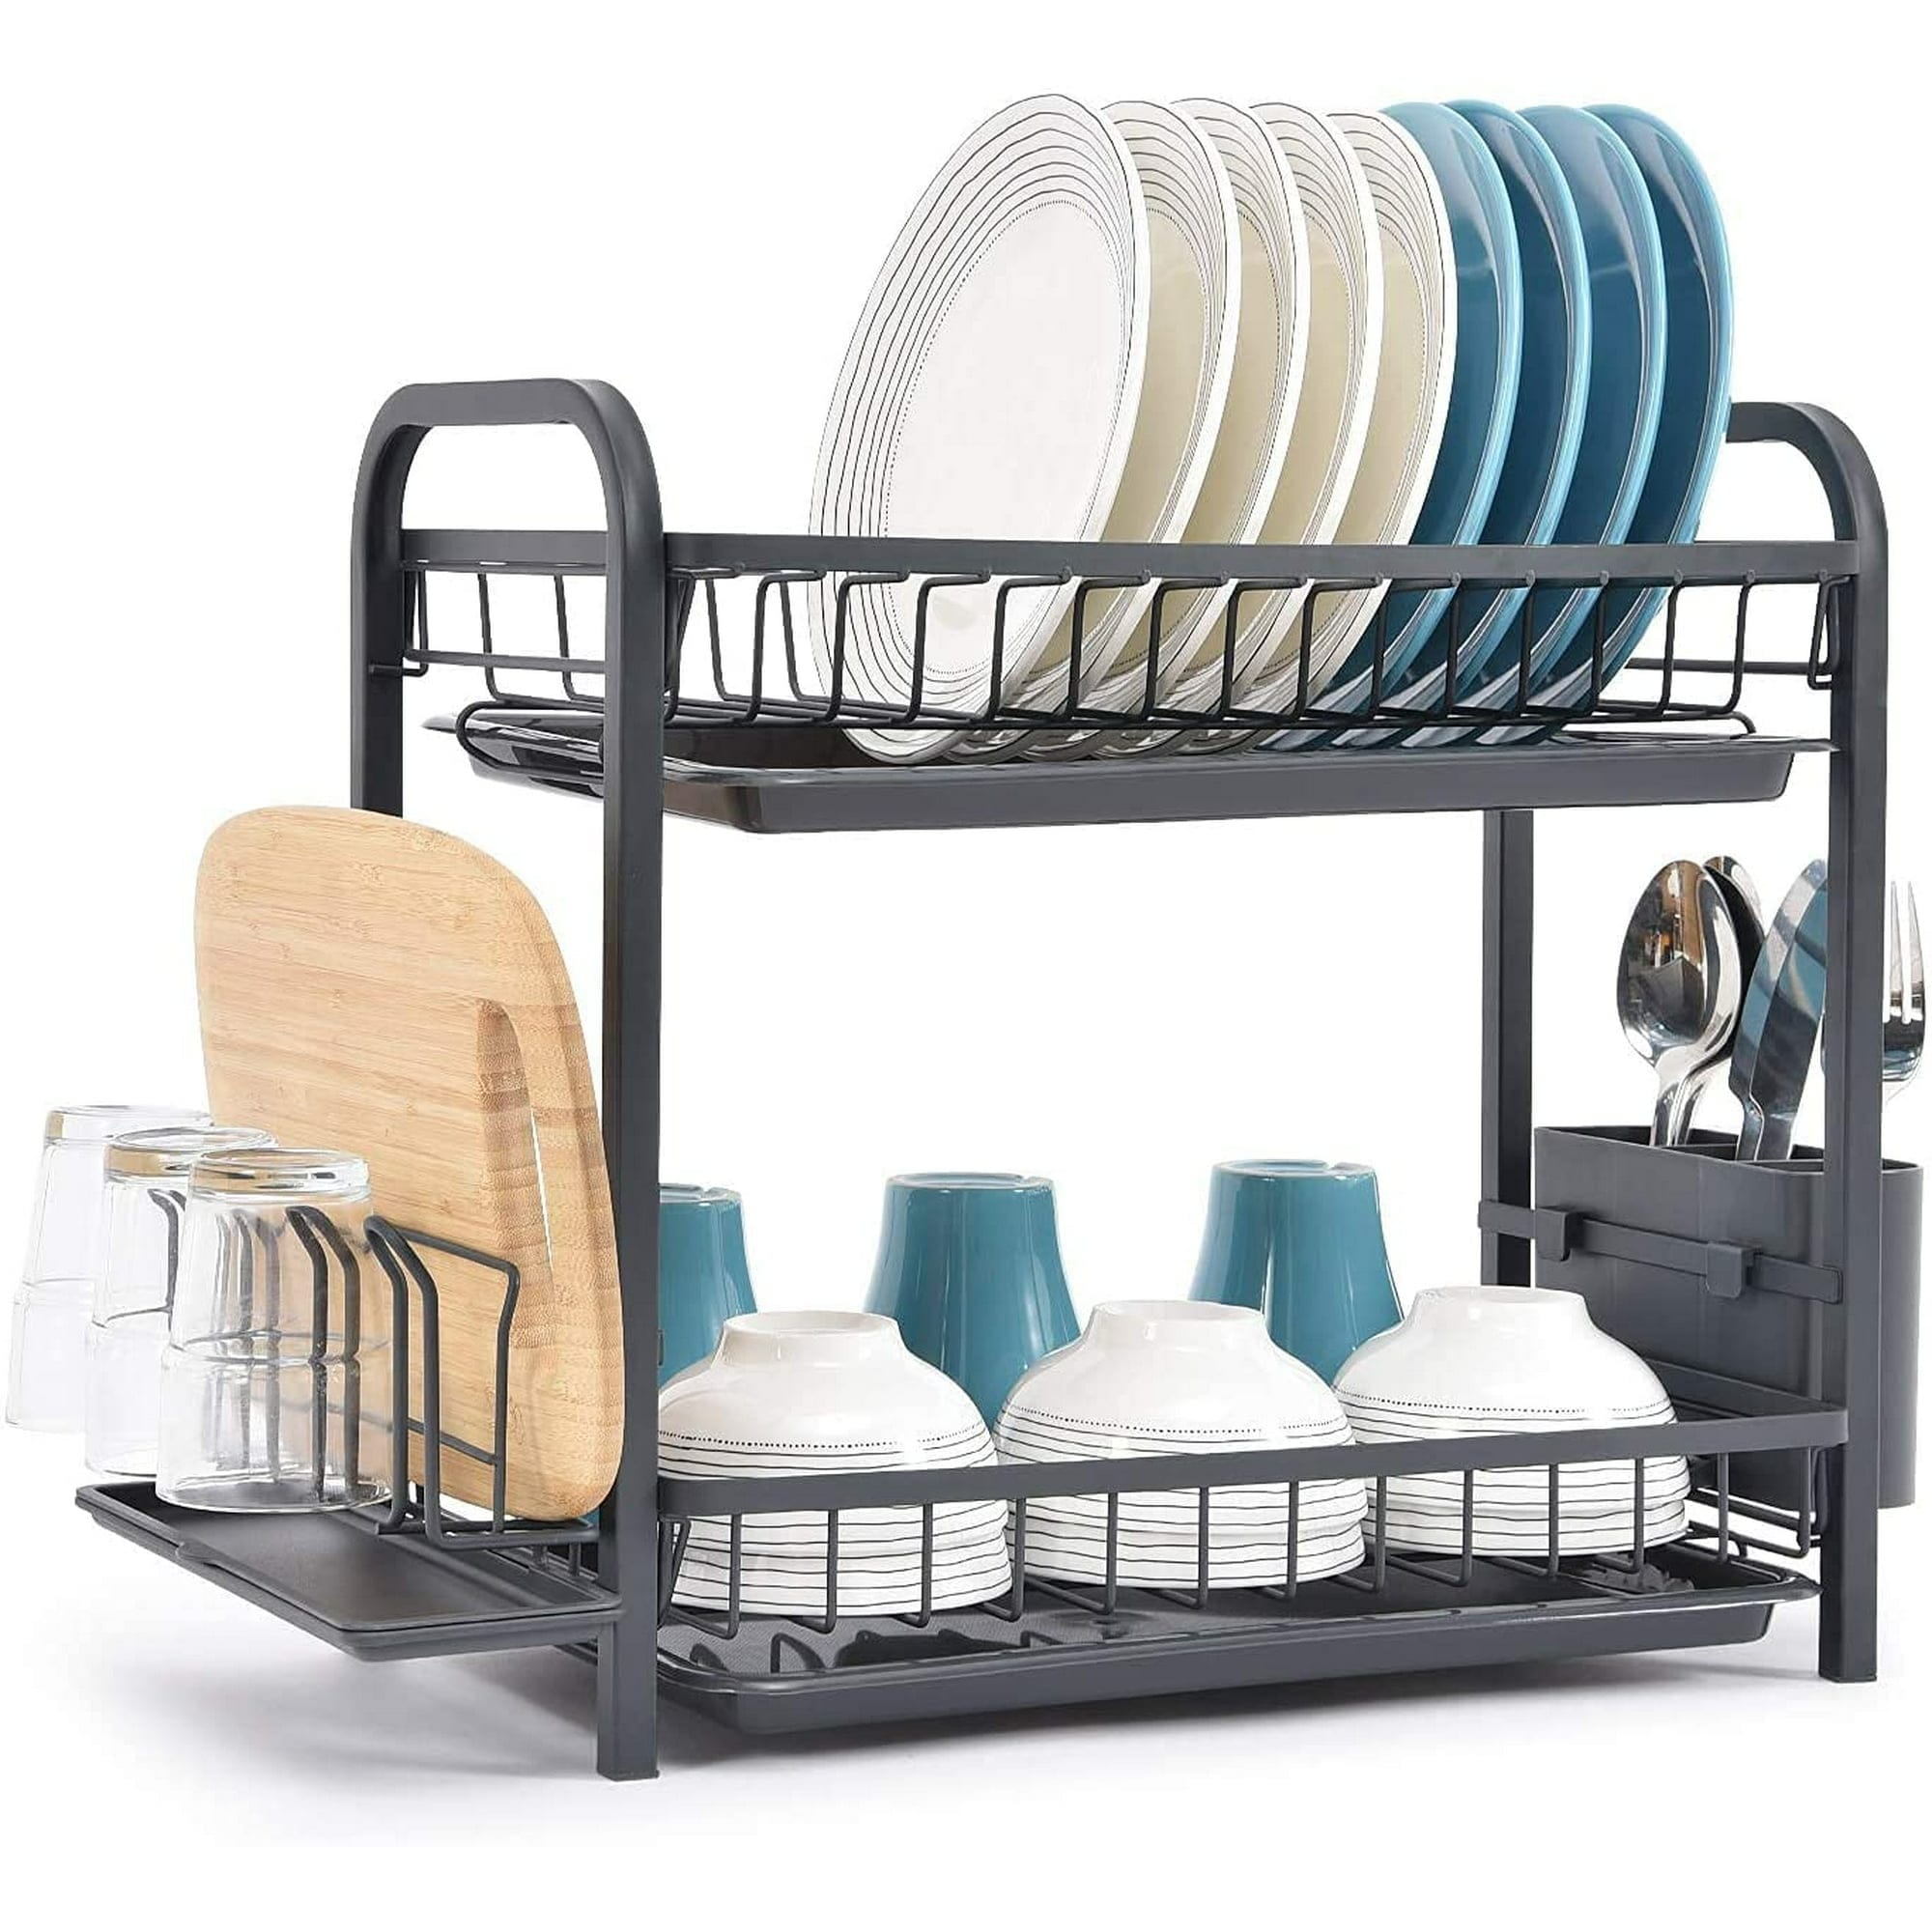 2 Tier Dish Drainer, Dish Drying Rack with Drip Tray, Dish Drainer Rack  with Drainboard and Utensil Holder (White)